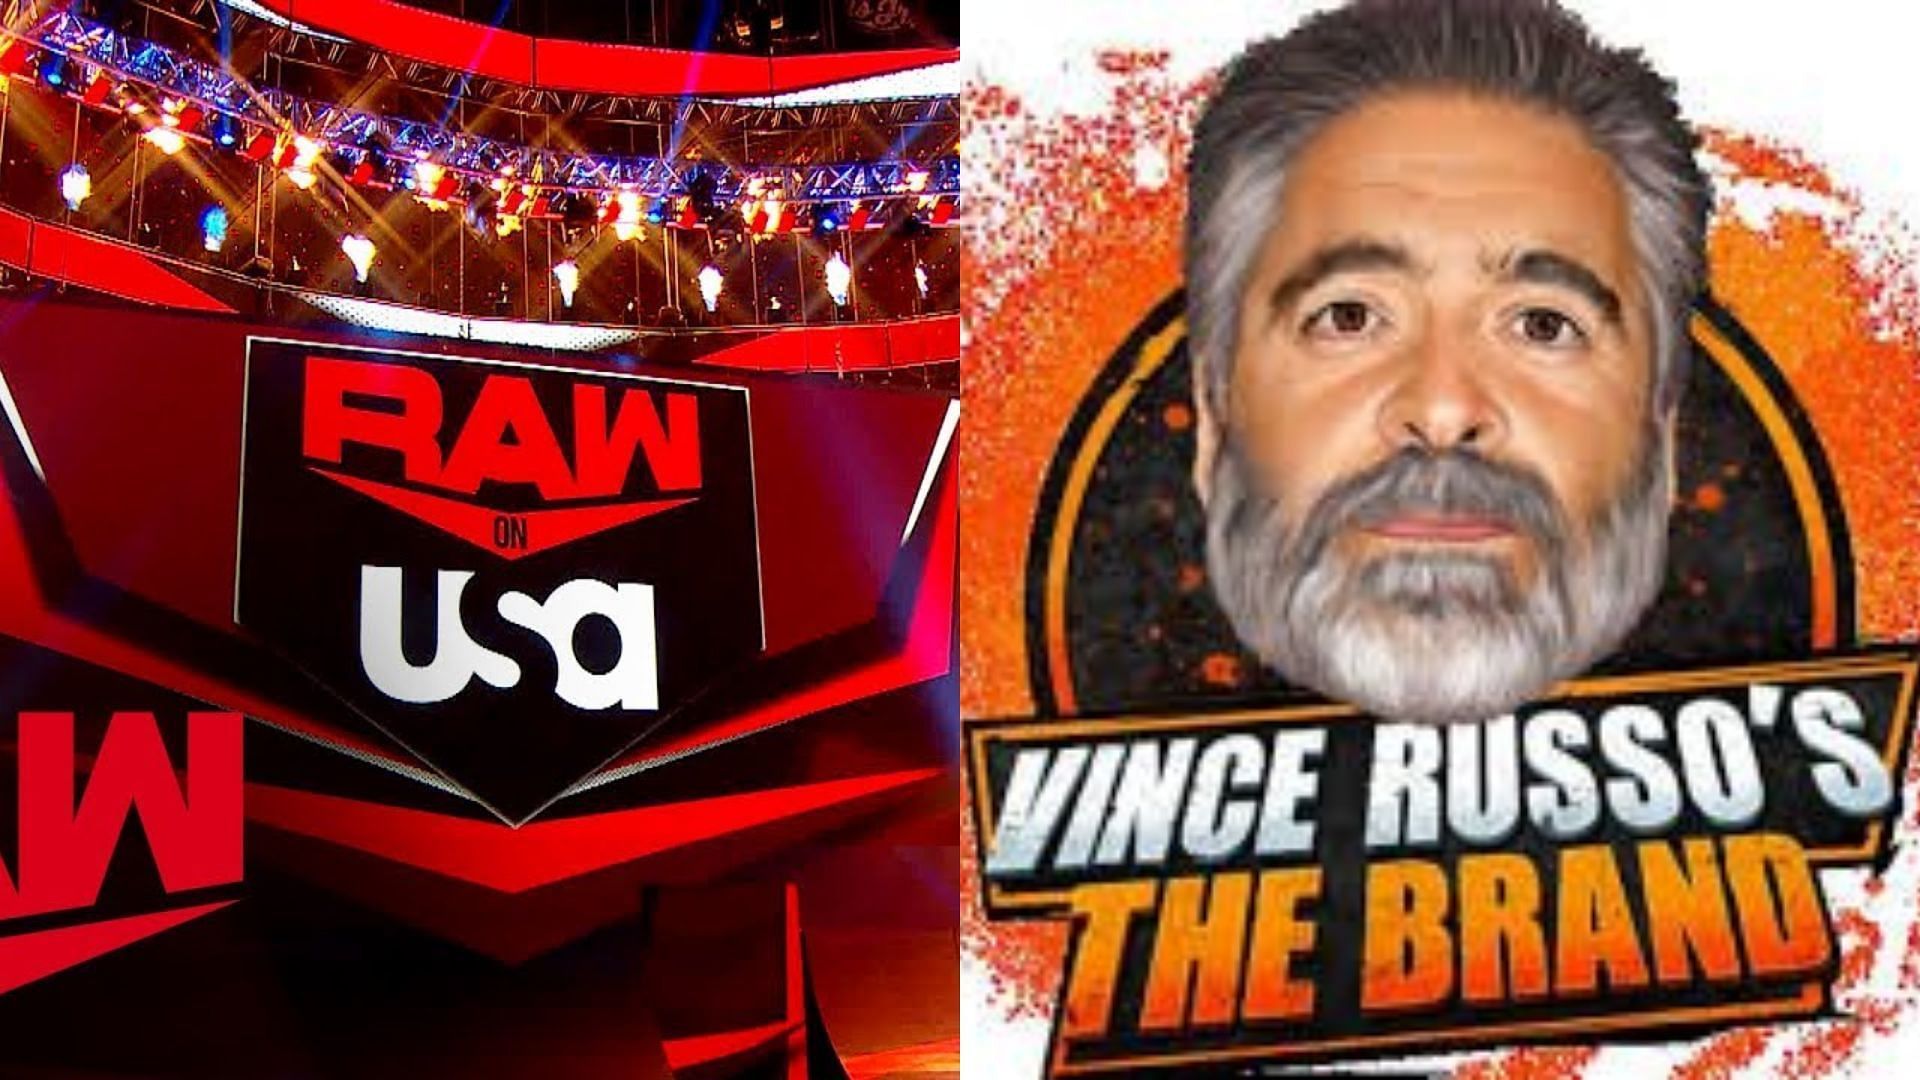 Monday Night RAW had two title matches this week